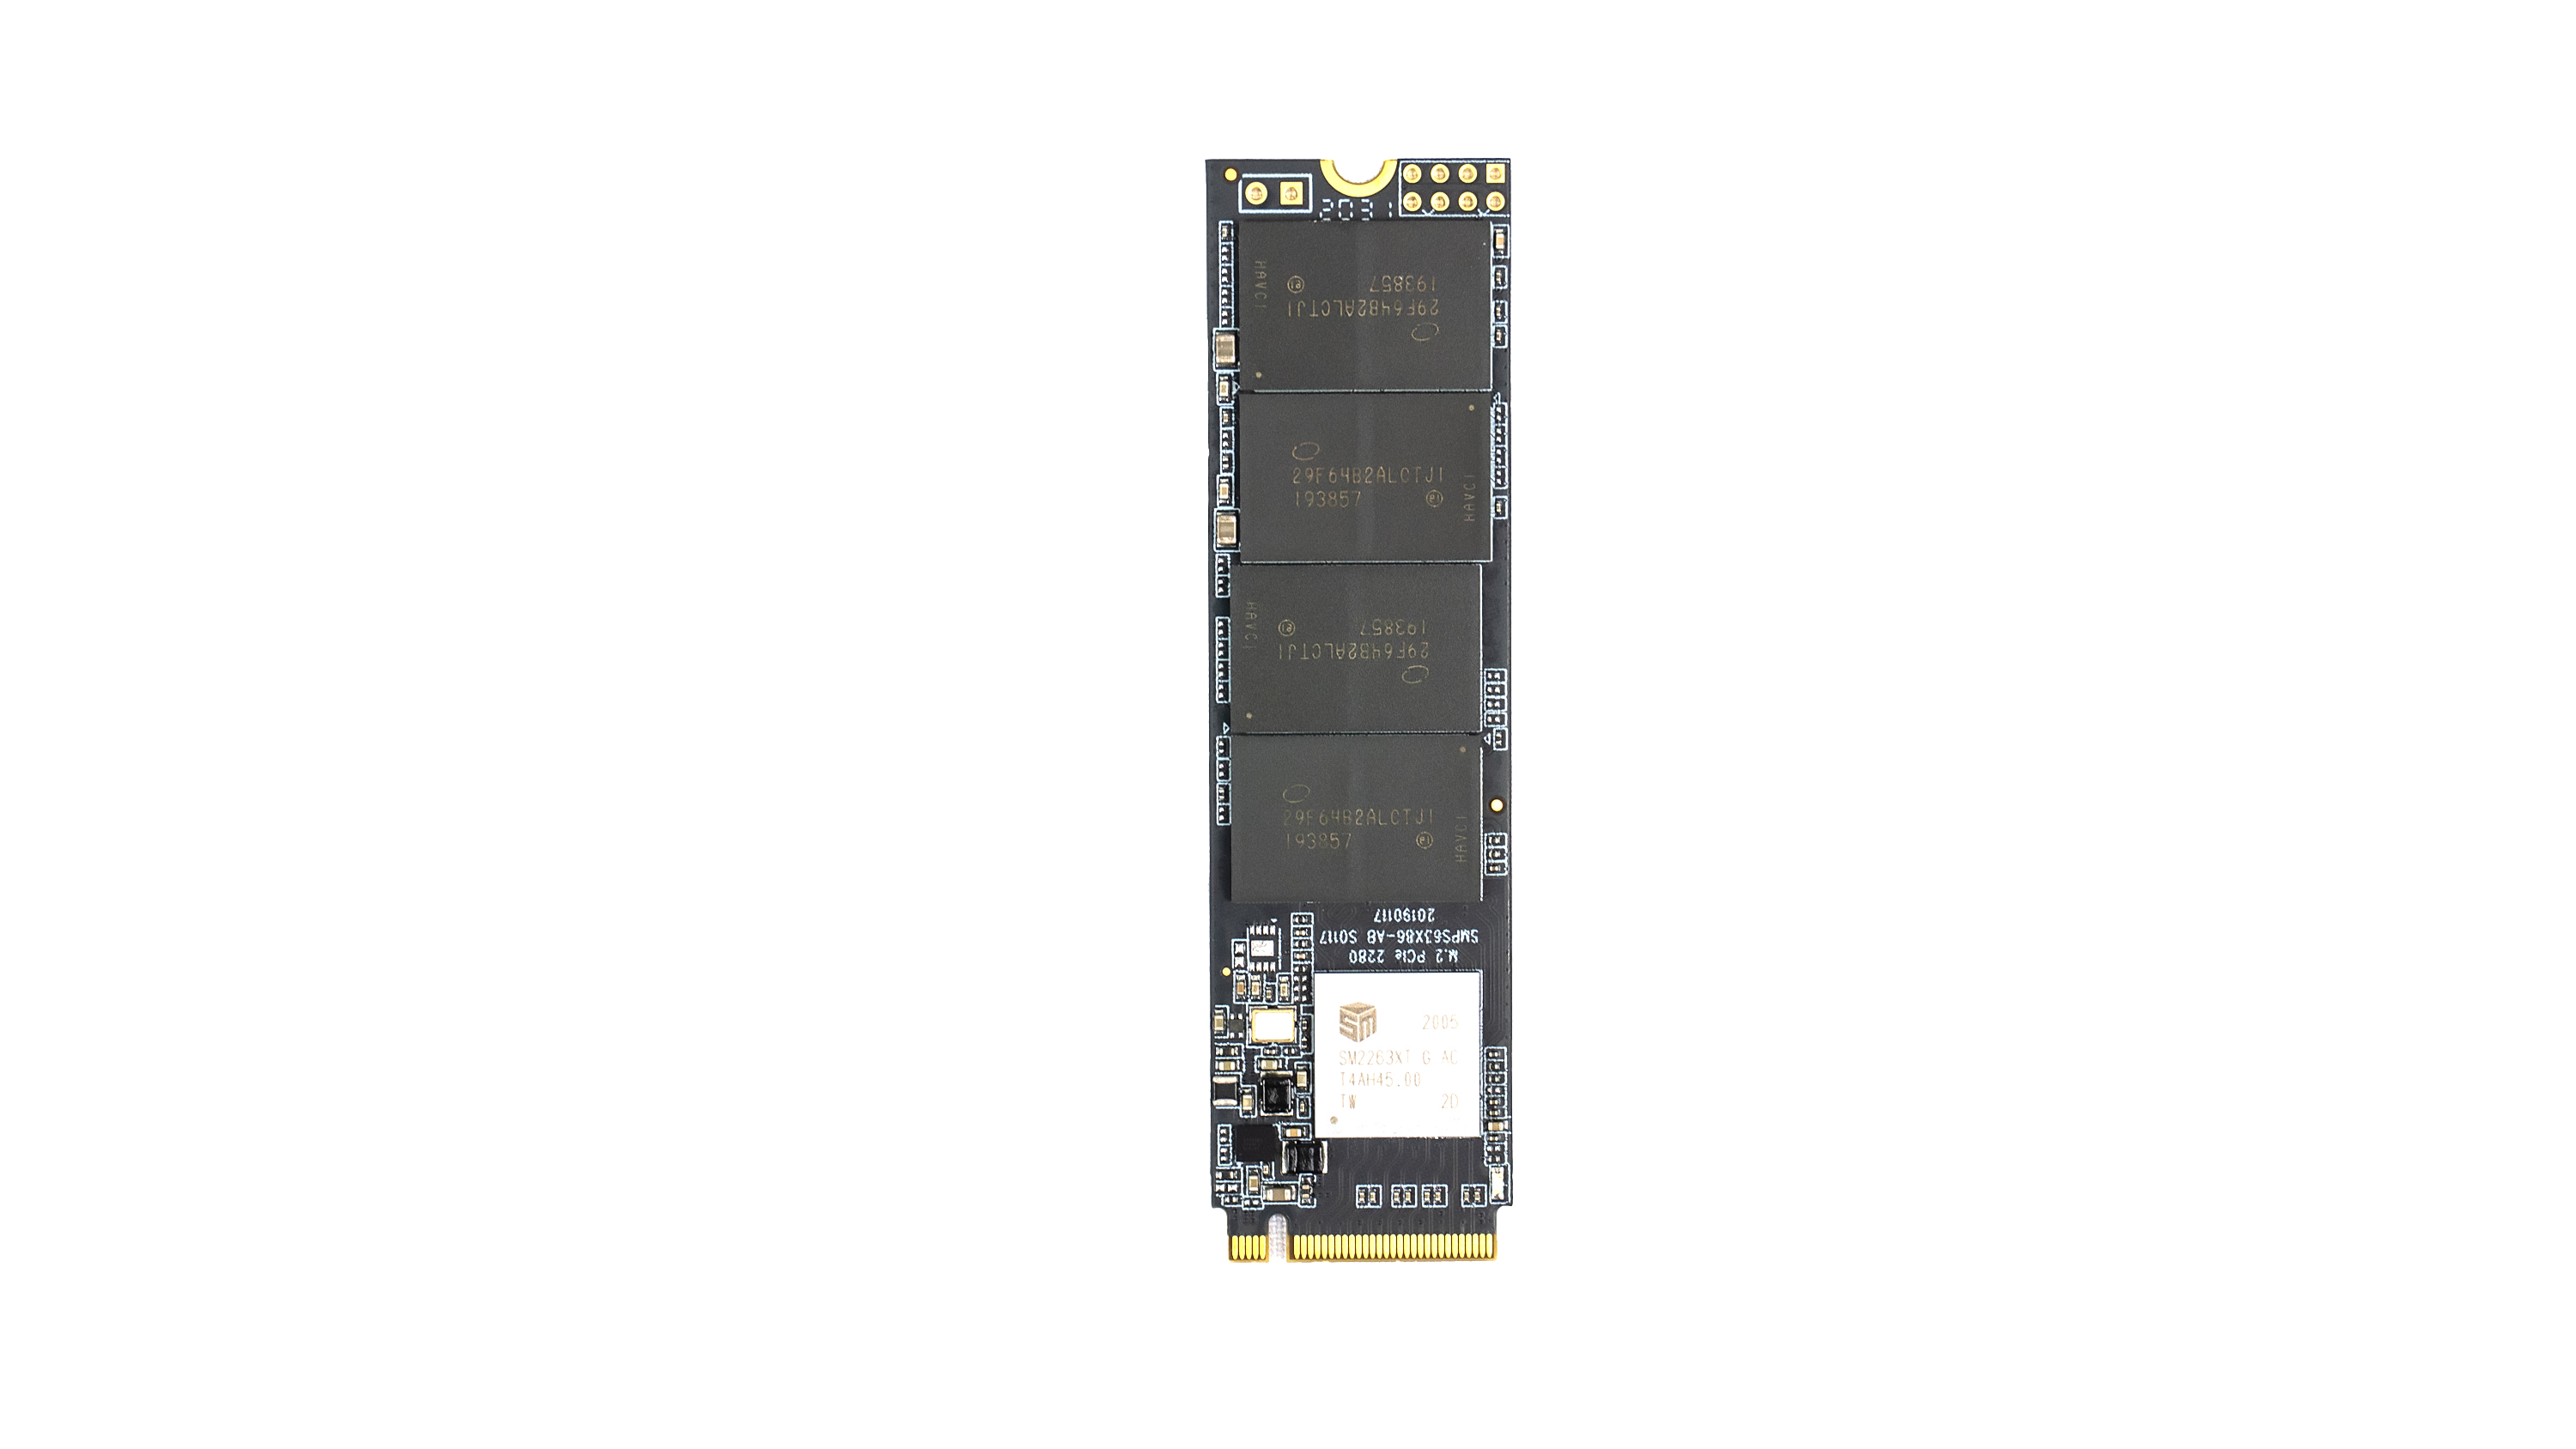 256 ГБ SSD M.2 накопитель Silicon Power p34a60. 256 ГБ SSD M.2 накопитель Silicon Power xd80 [sp256gbp34xd8005]. Твердотельный накопитель SSD M.2 2280 256gb SILICONPOWER p34a60 PCIE gen3x4. Silicon Motion sm2263xt. Ssd silicon power p34a60